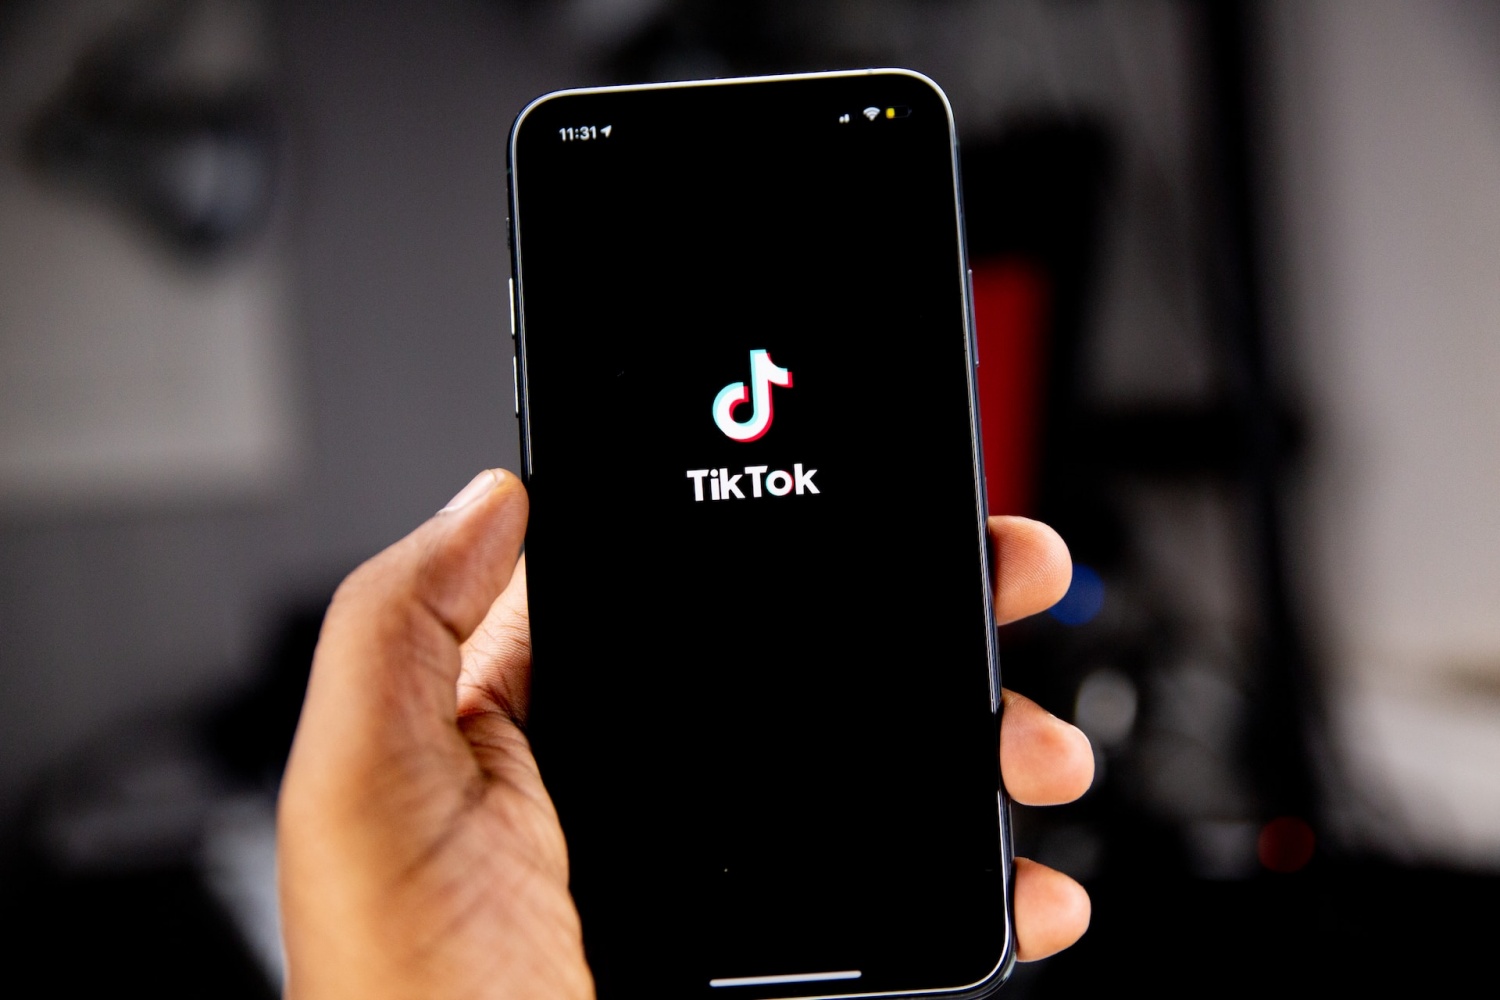 TikTok Introduces 'Meet Cute' Channel For Internal Matchmaking Service For Employees